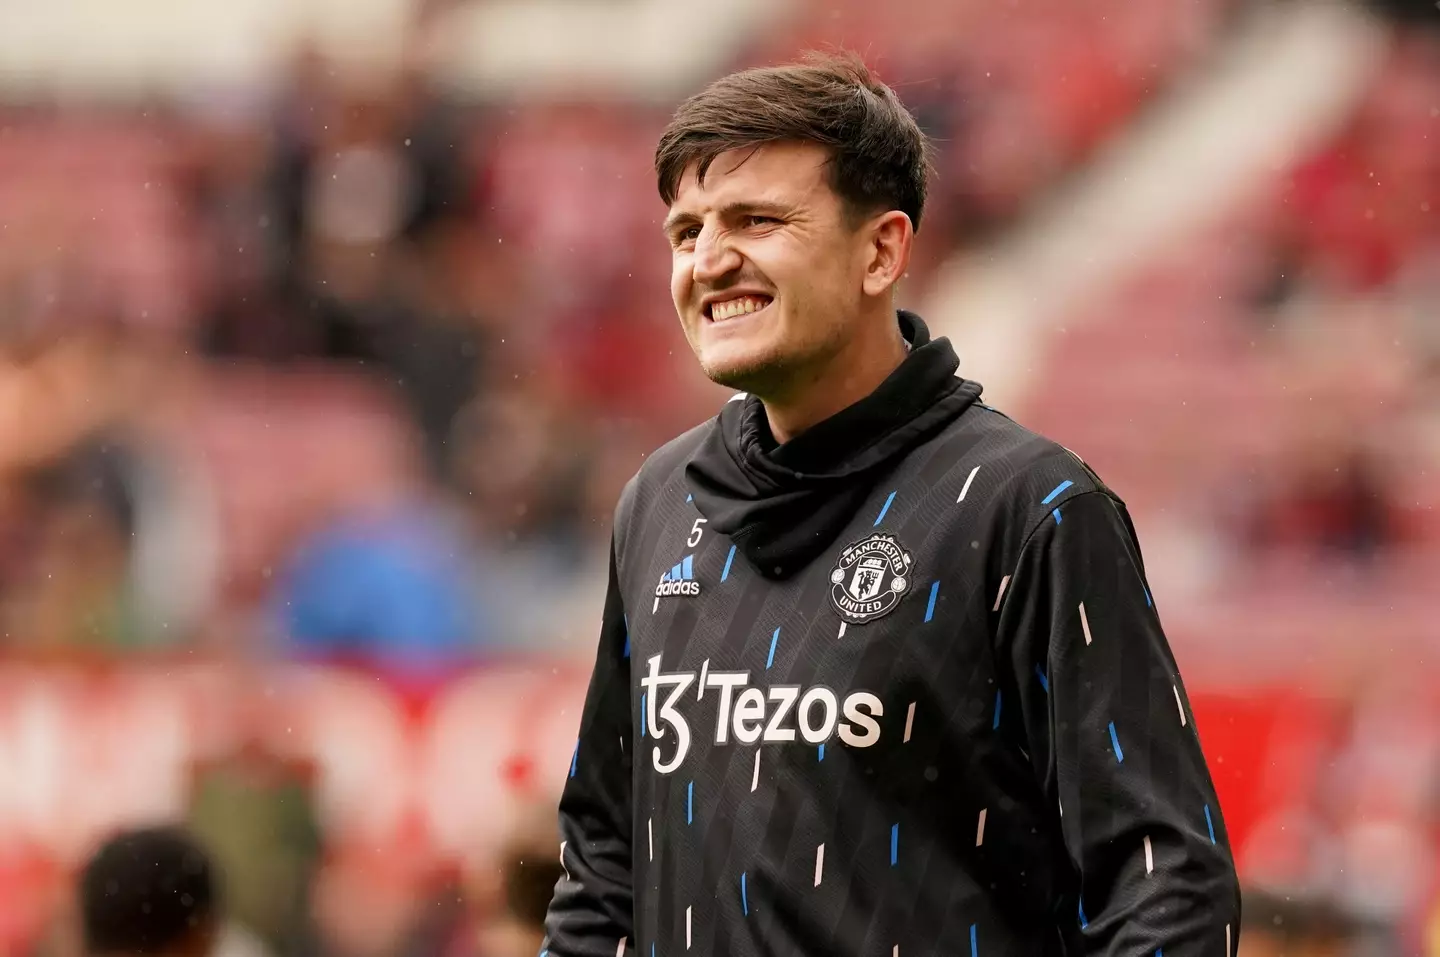 Maguire has spent most of this season on the bench. Image: Alamy